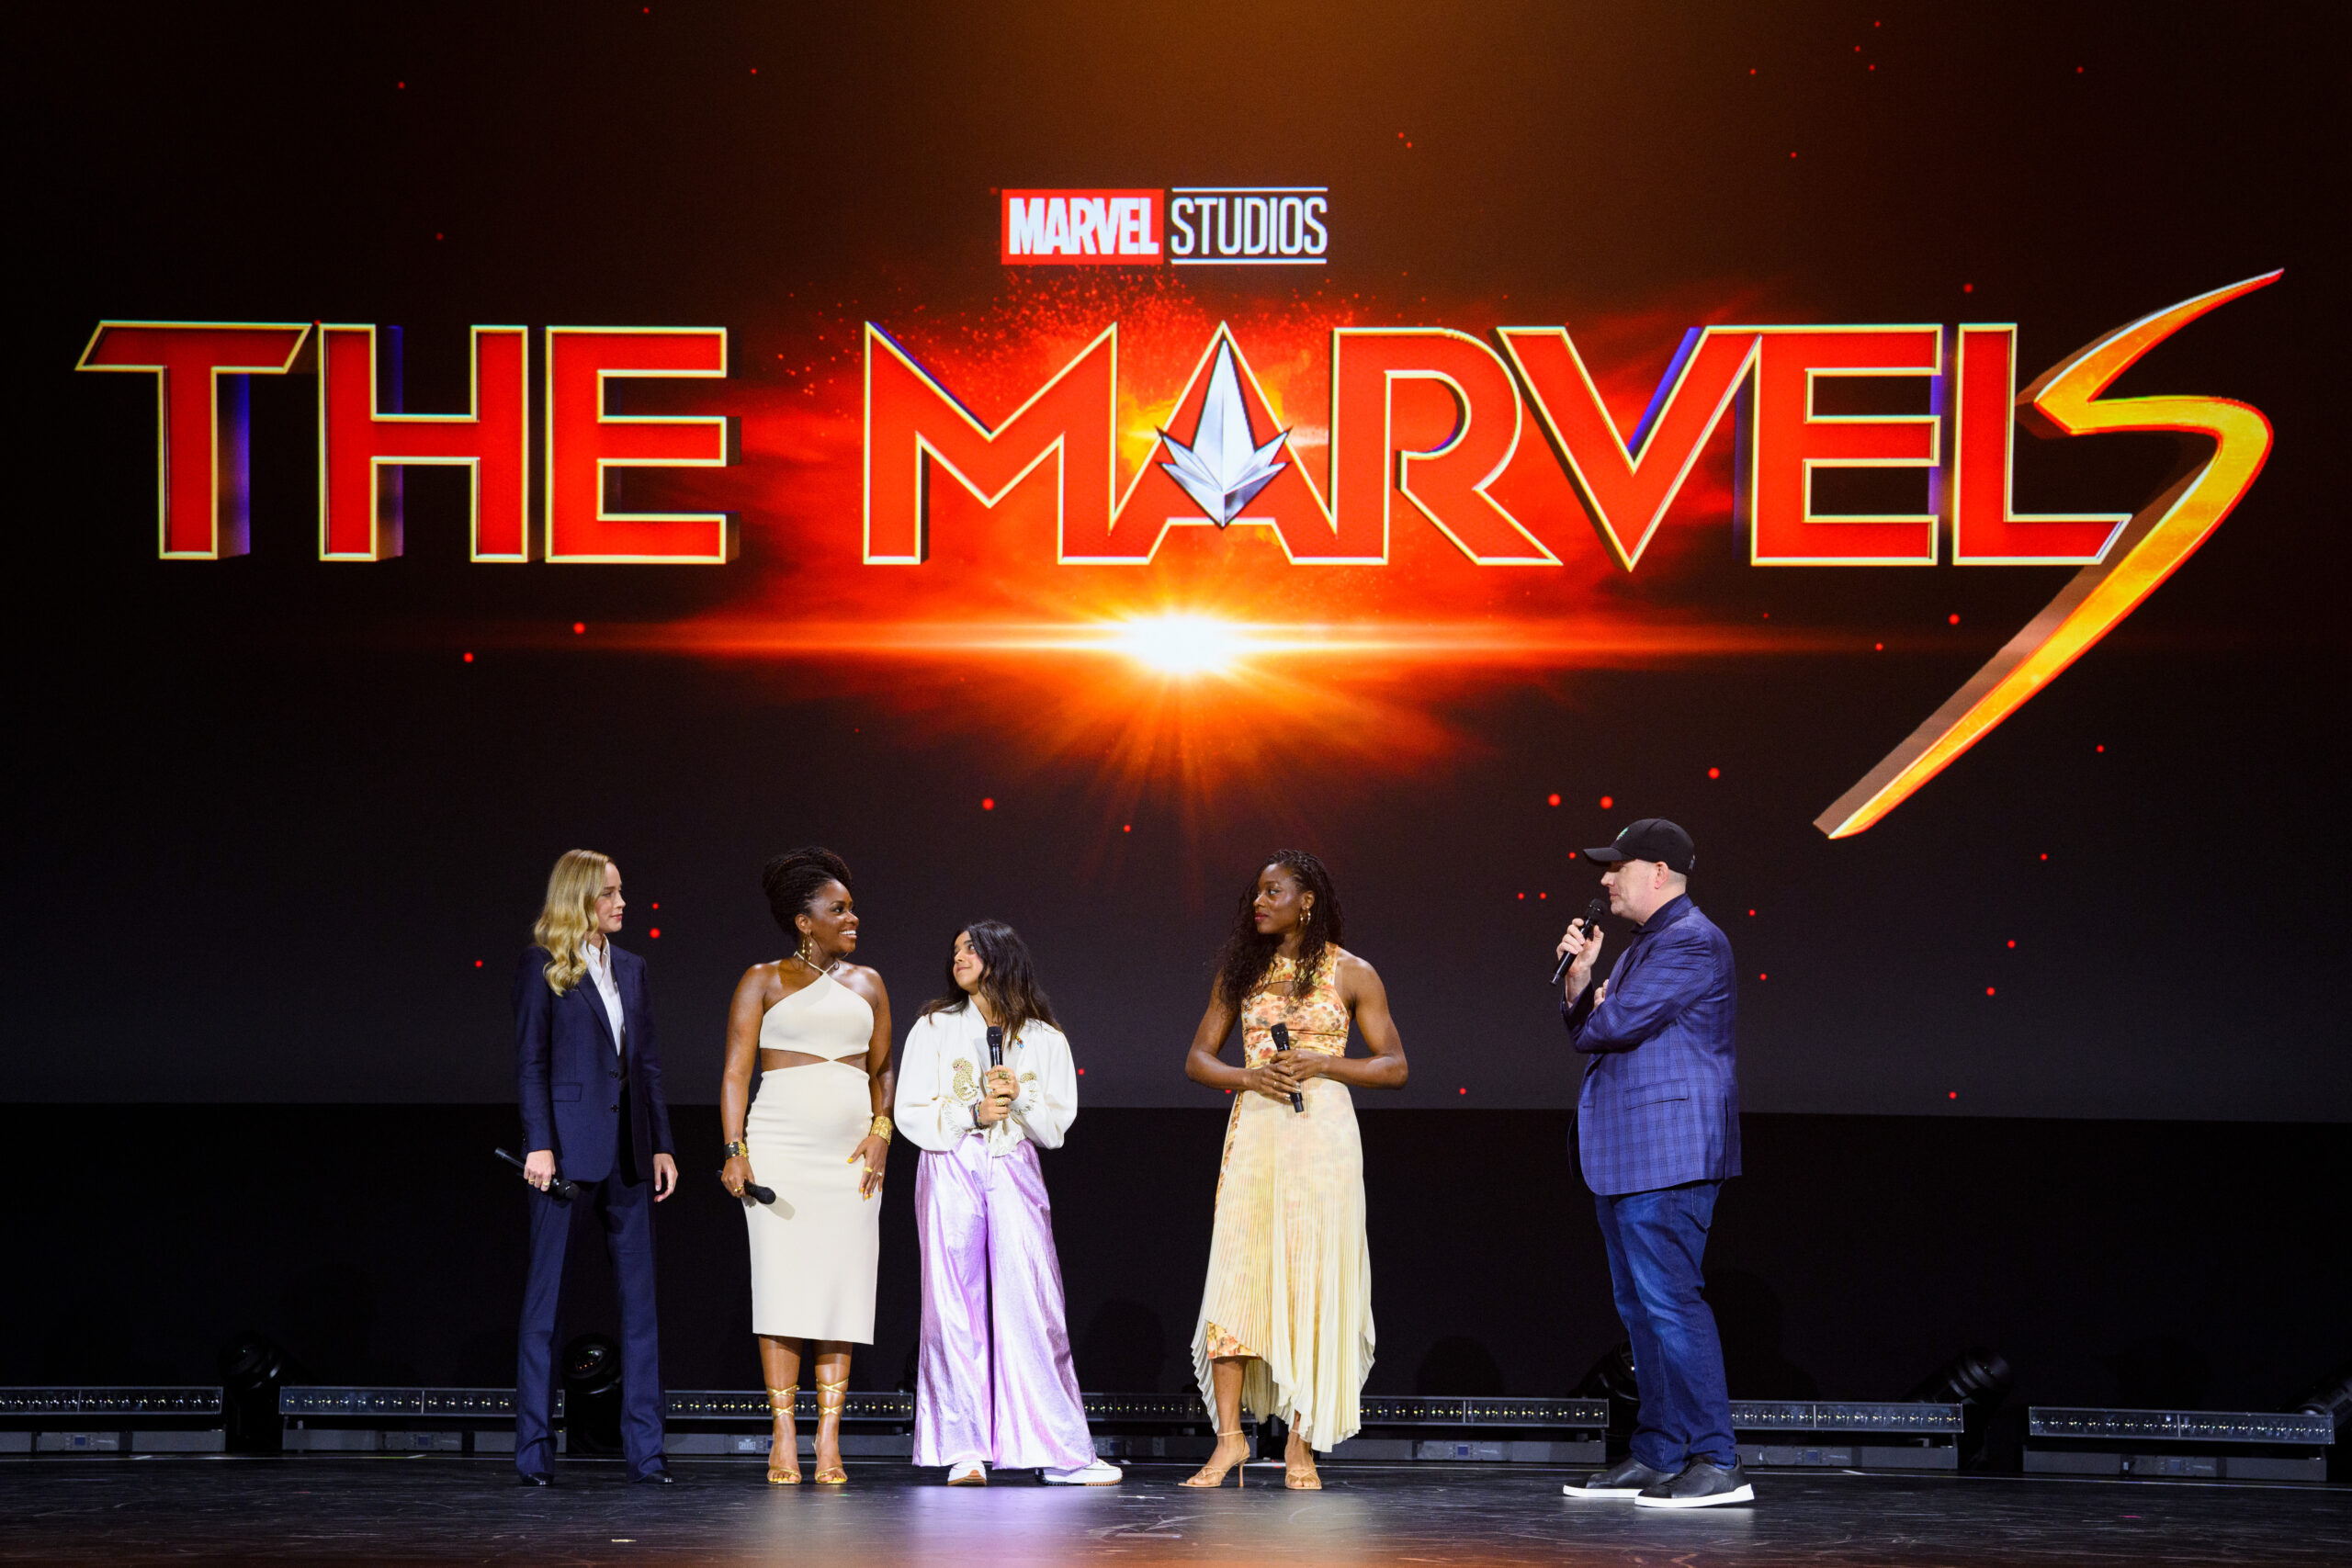 The Marvels' Shows First Footage With Brie Larson, Teyonah Parris